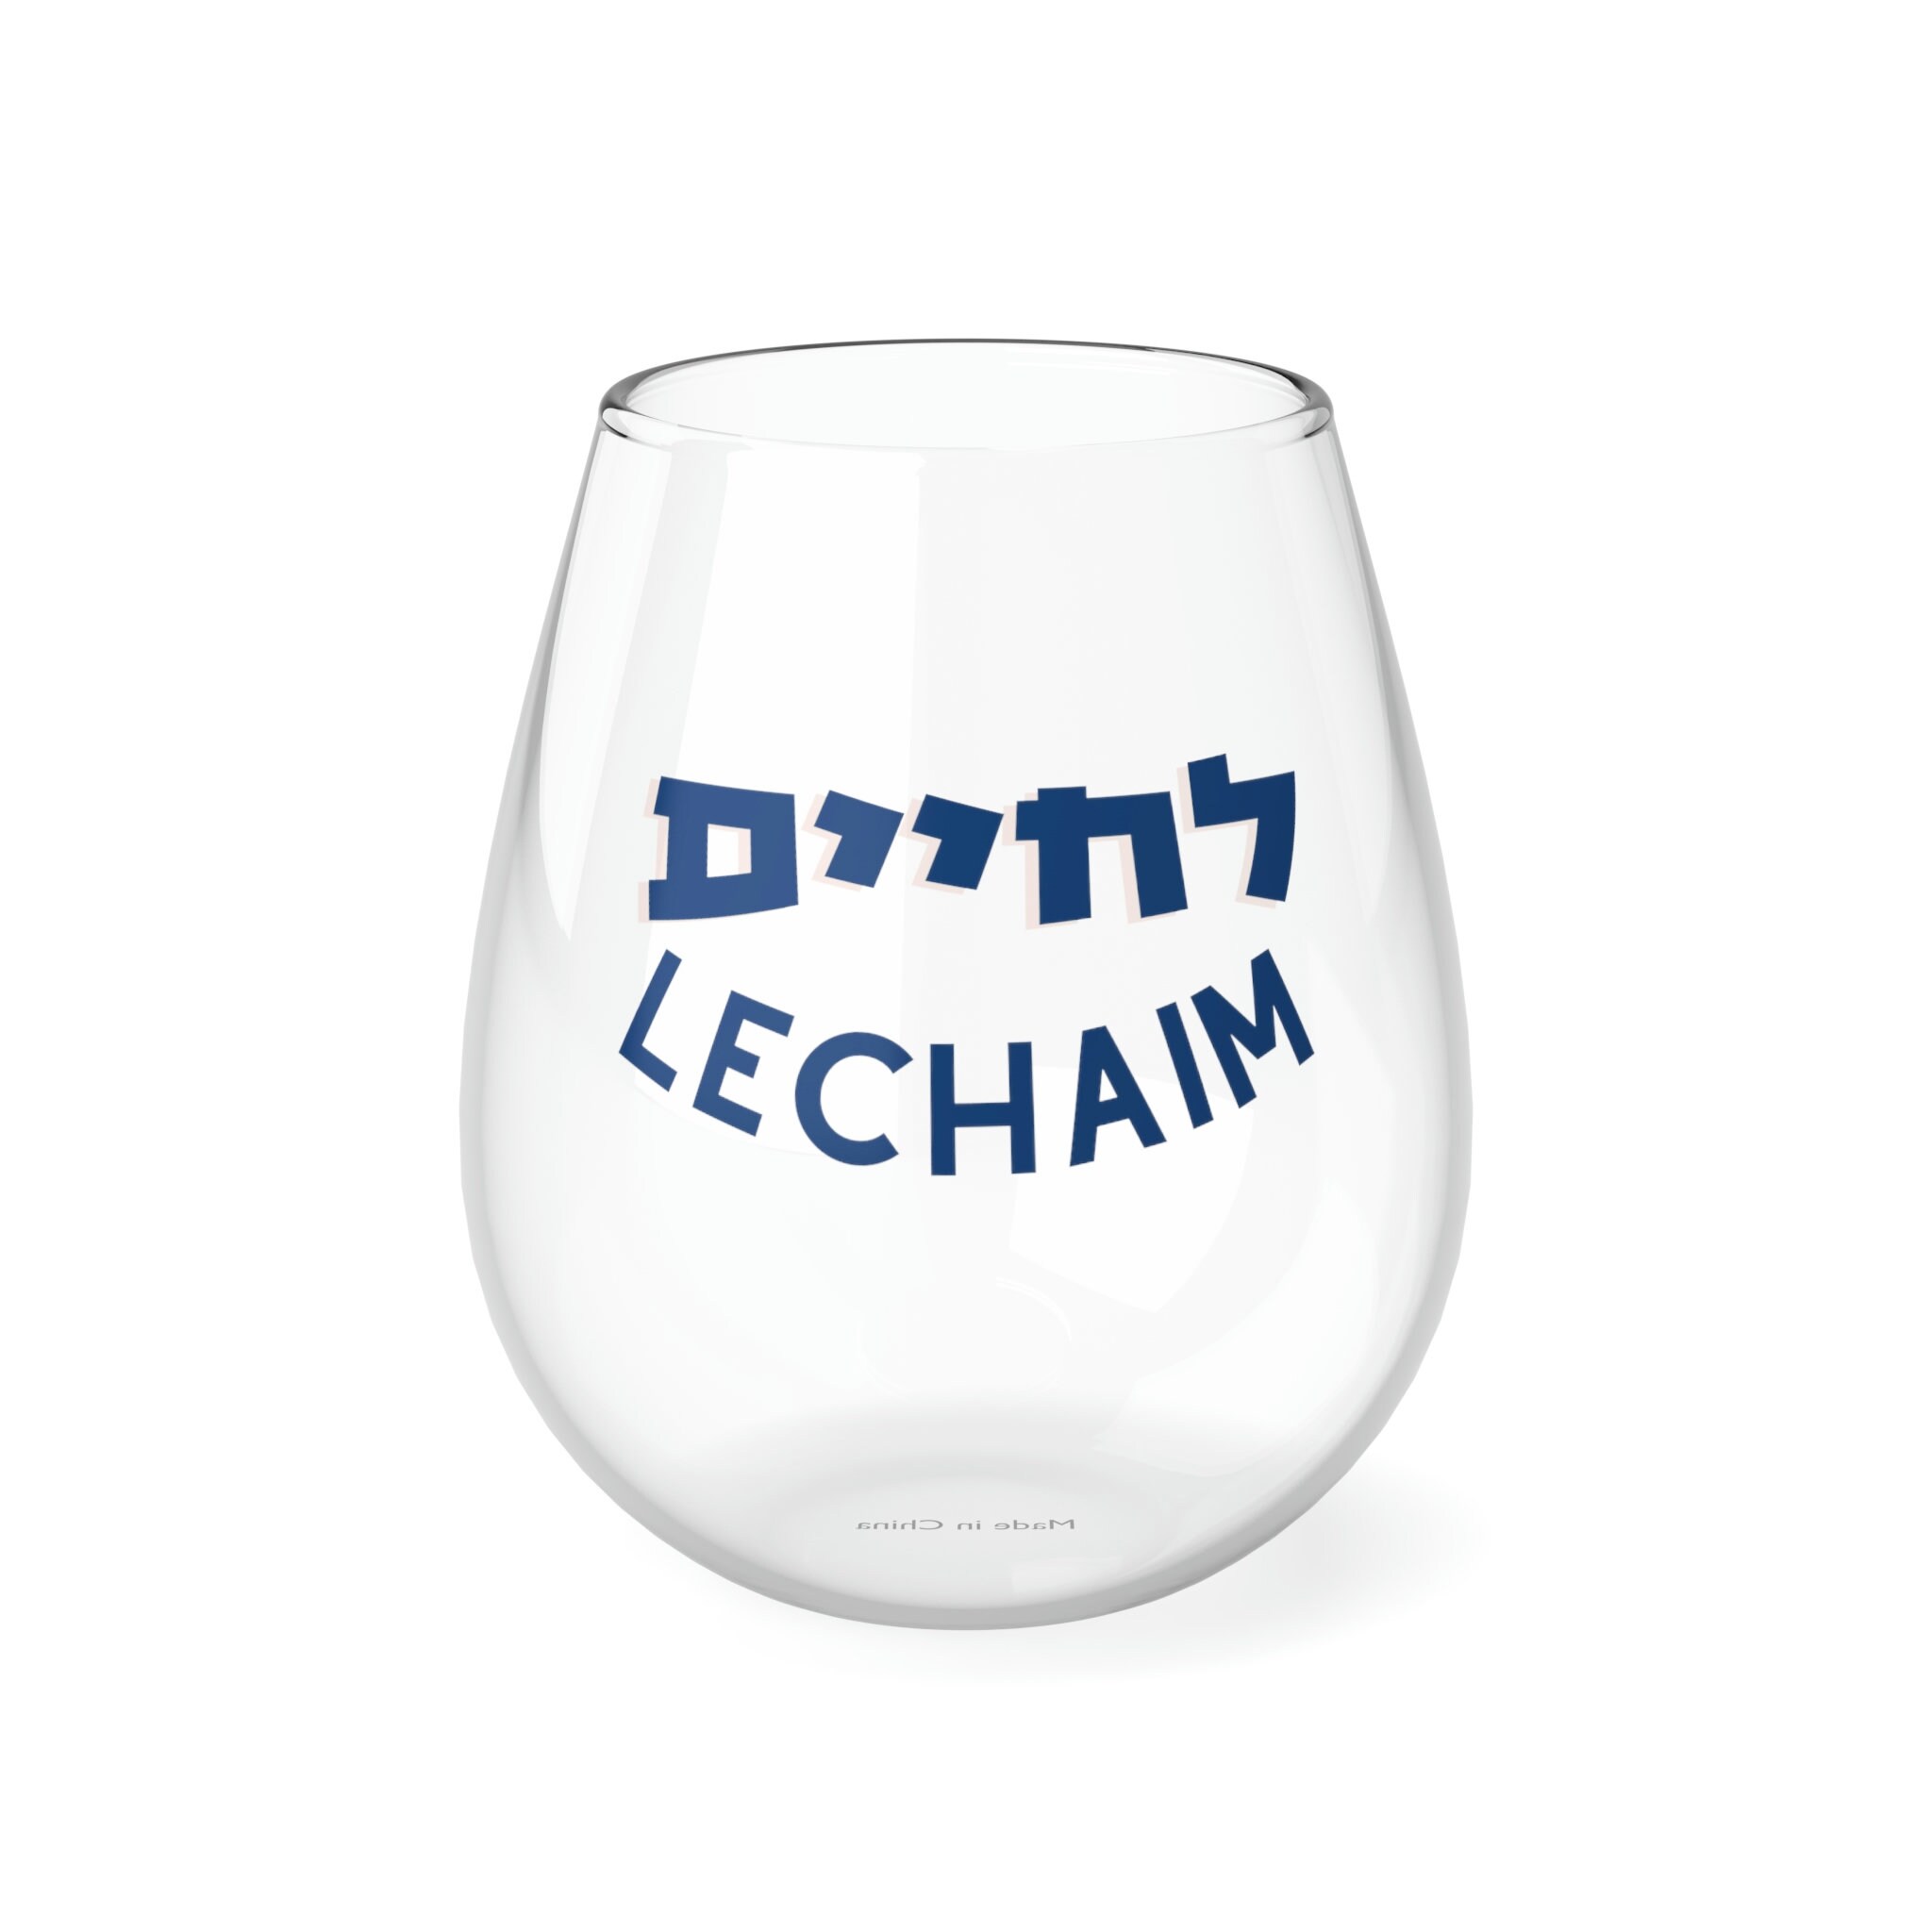 Print On Demand Stemless Wine Tumblers with Automated Fulfillment